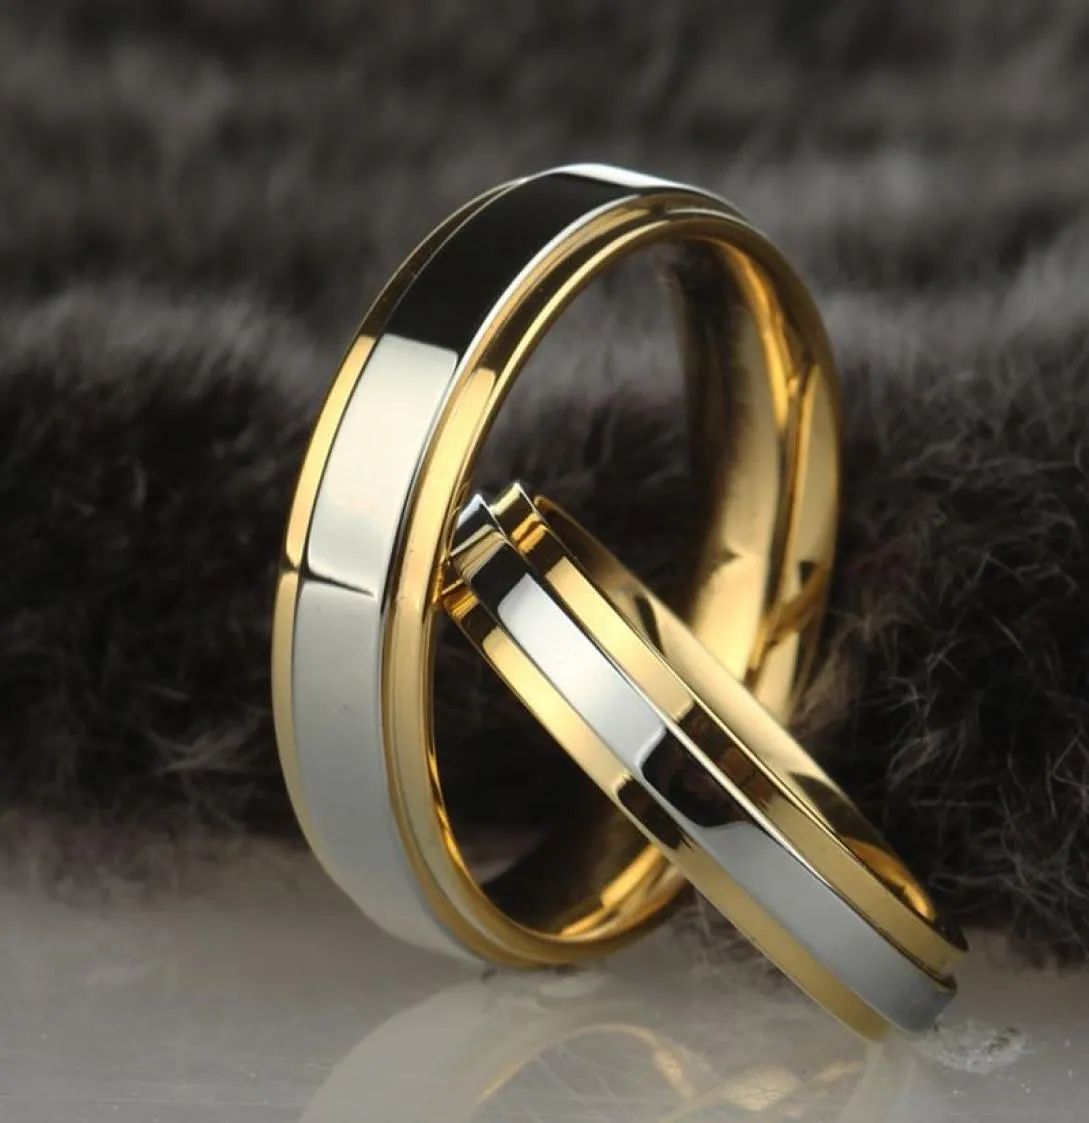 Stainless steel Wedding Ring Silver Gold Color Simple Design Couple Alliance Ring 4mm 6mm Width Band Ring for Women and Men2193301